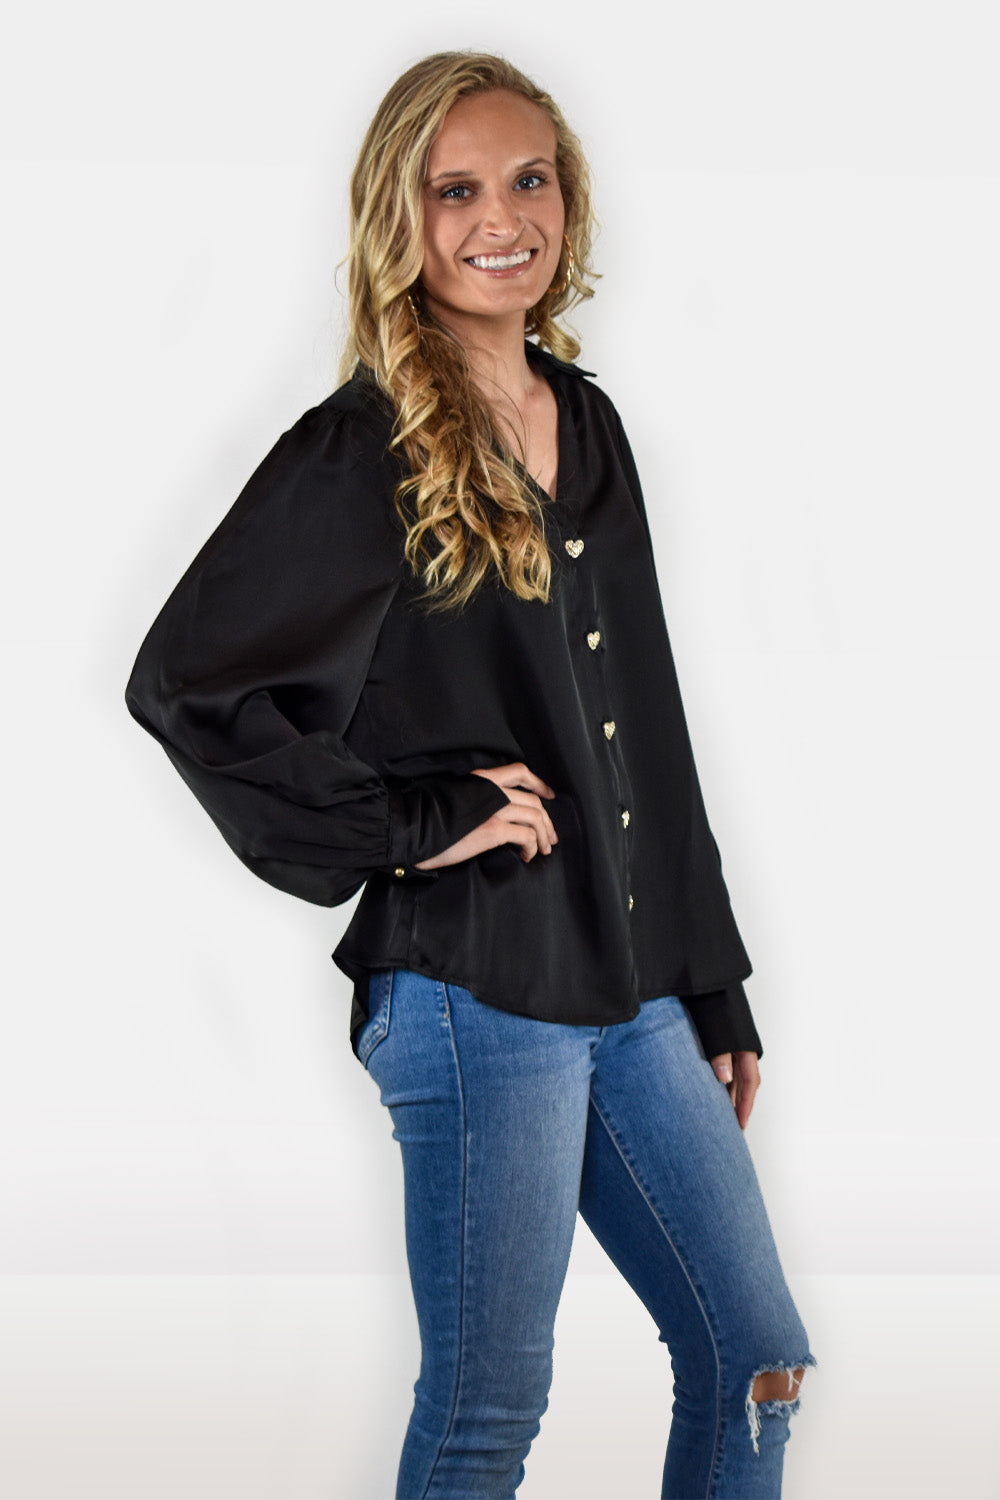 Satin Long Sleeve Blouse with Heart Shaped Buttons by Entro Clothing